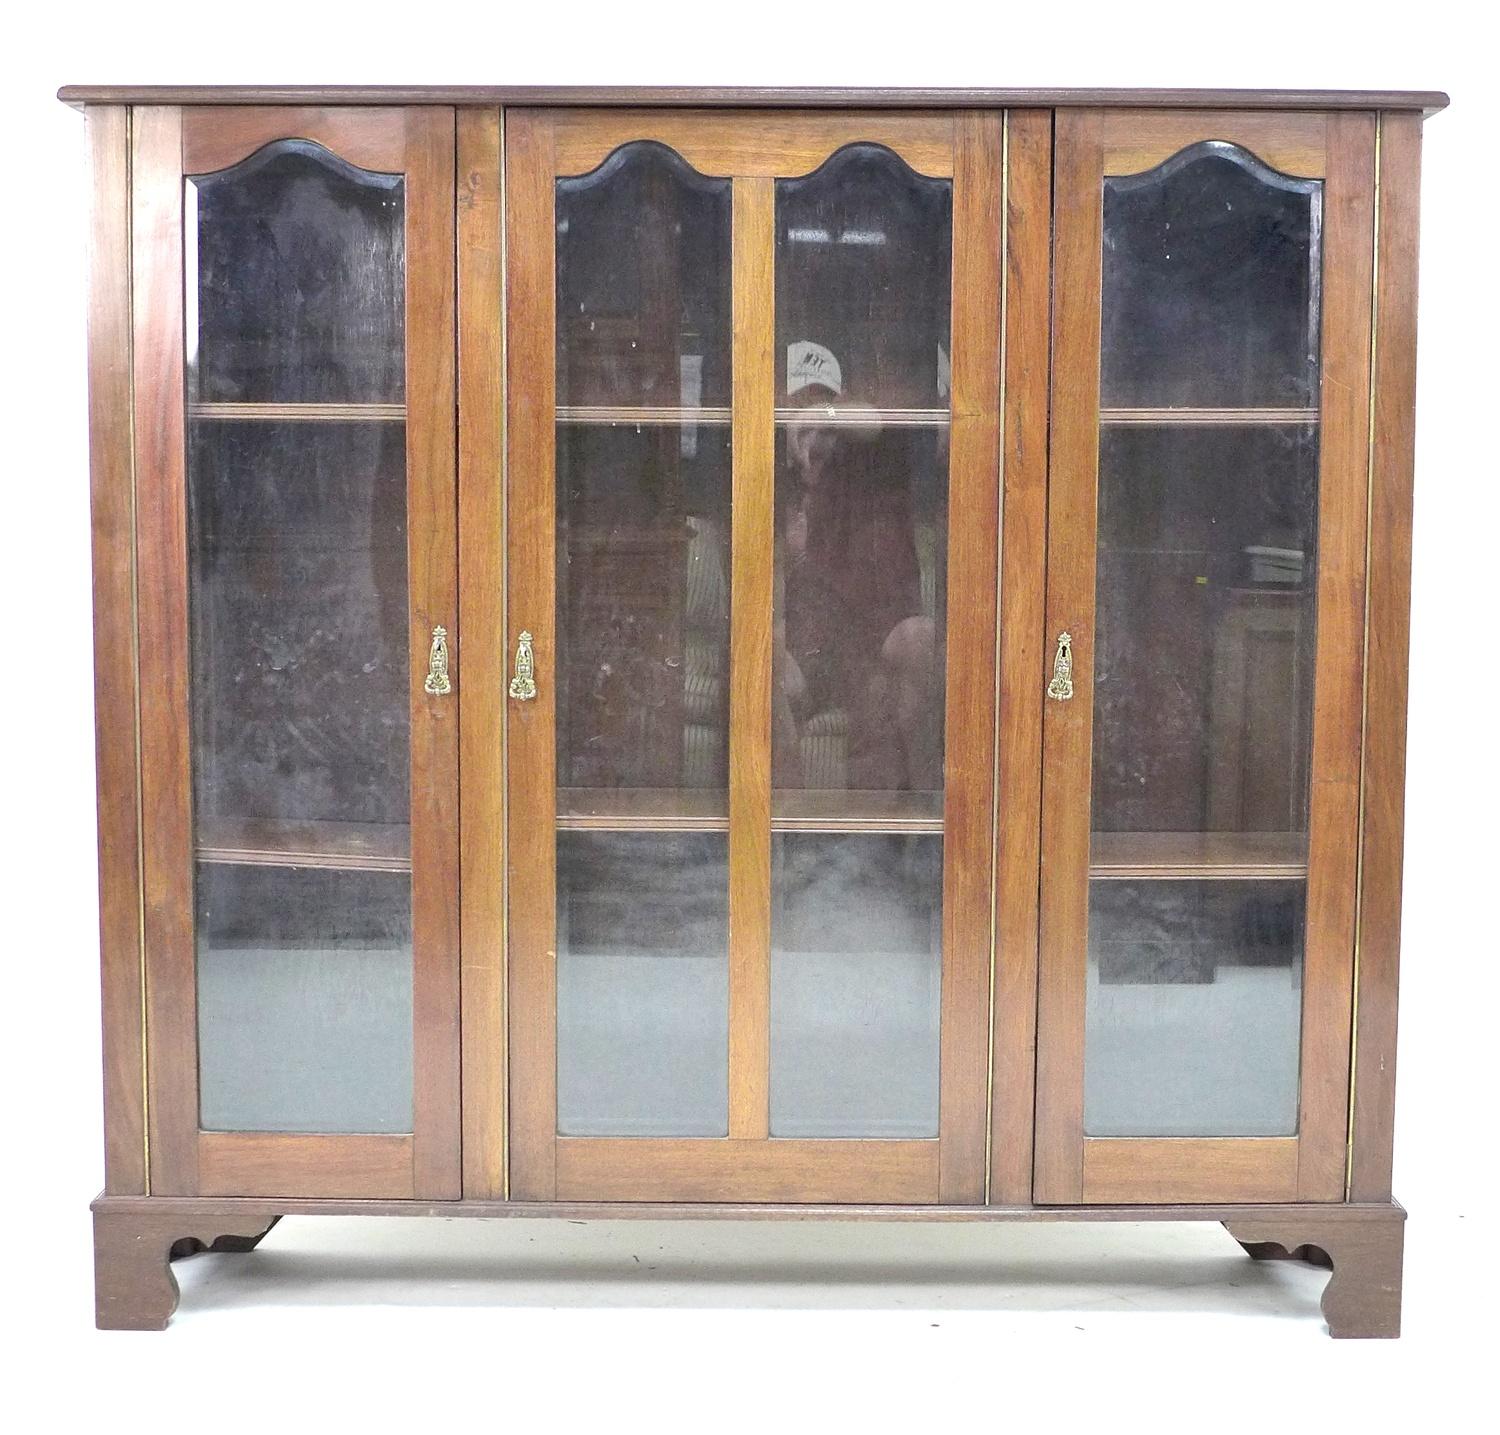 A mid 20th century mahogany glazed bookcase, with three glazed doors each enclosing two adjustable